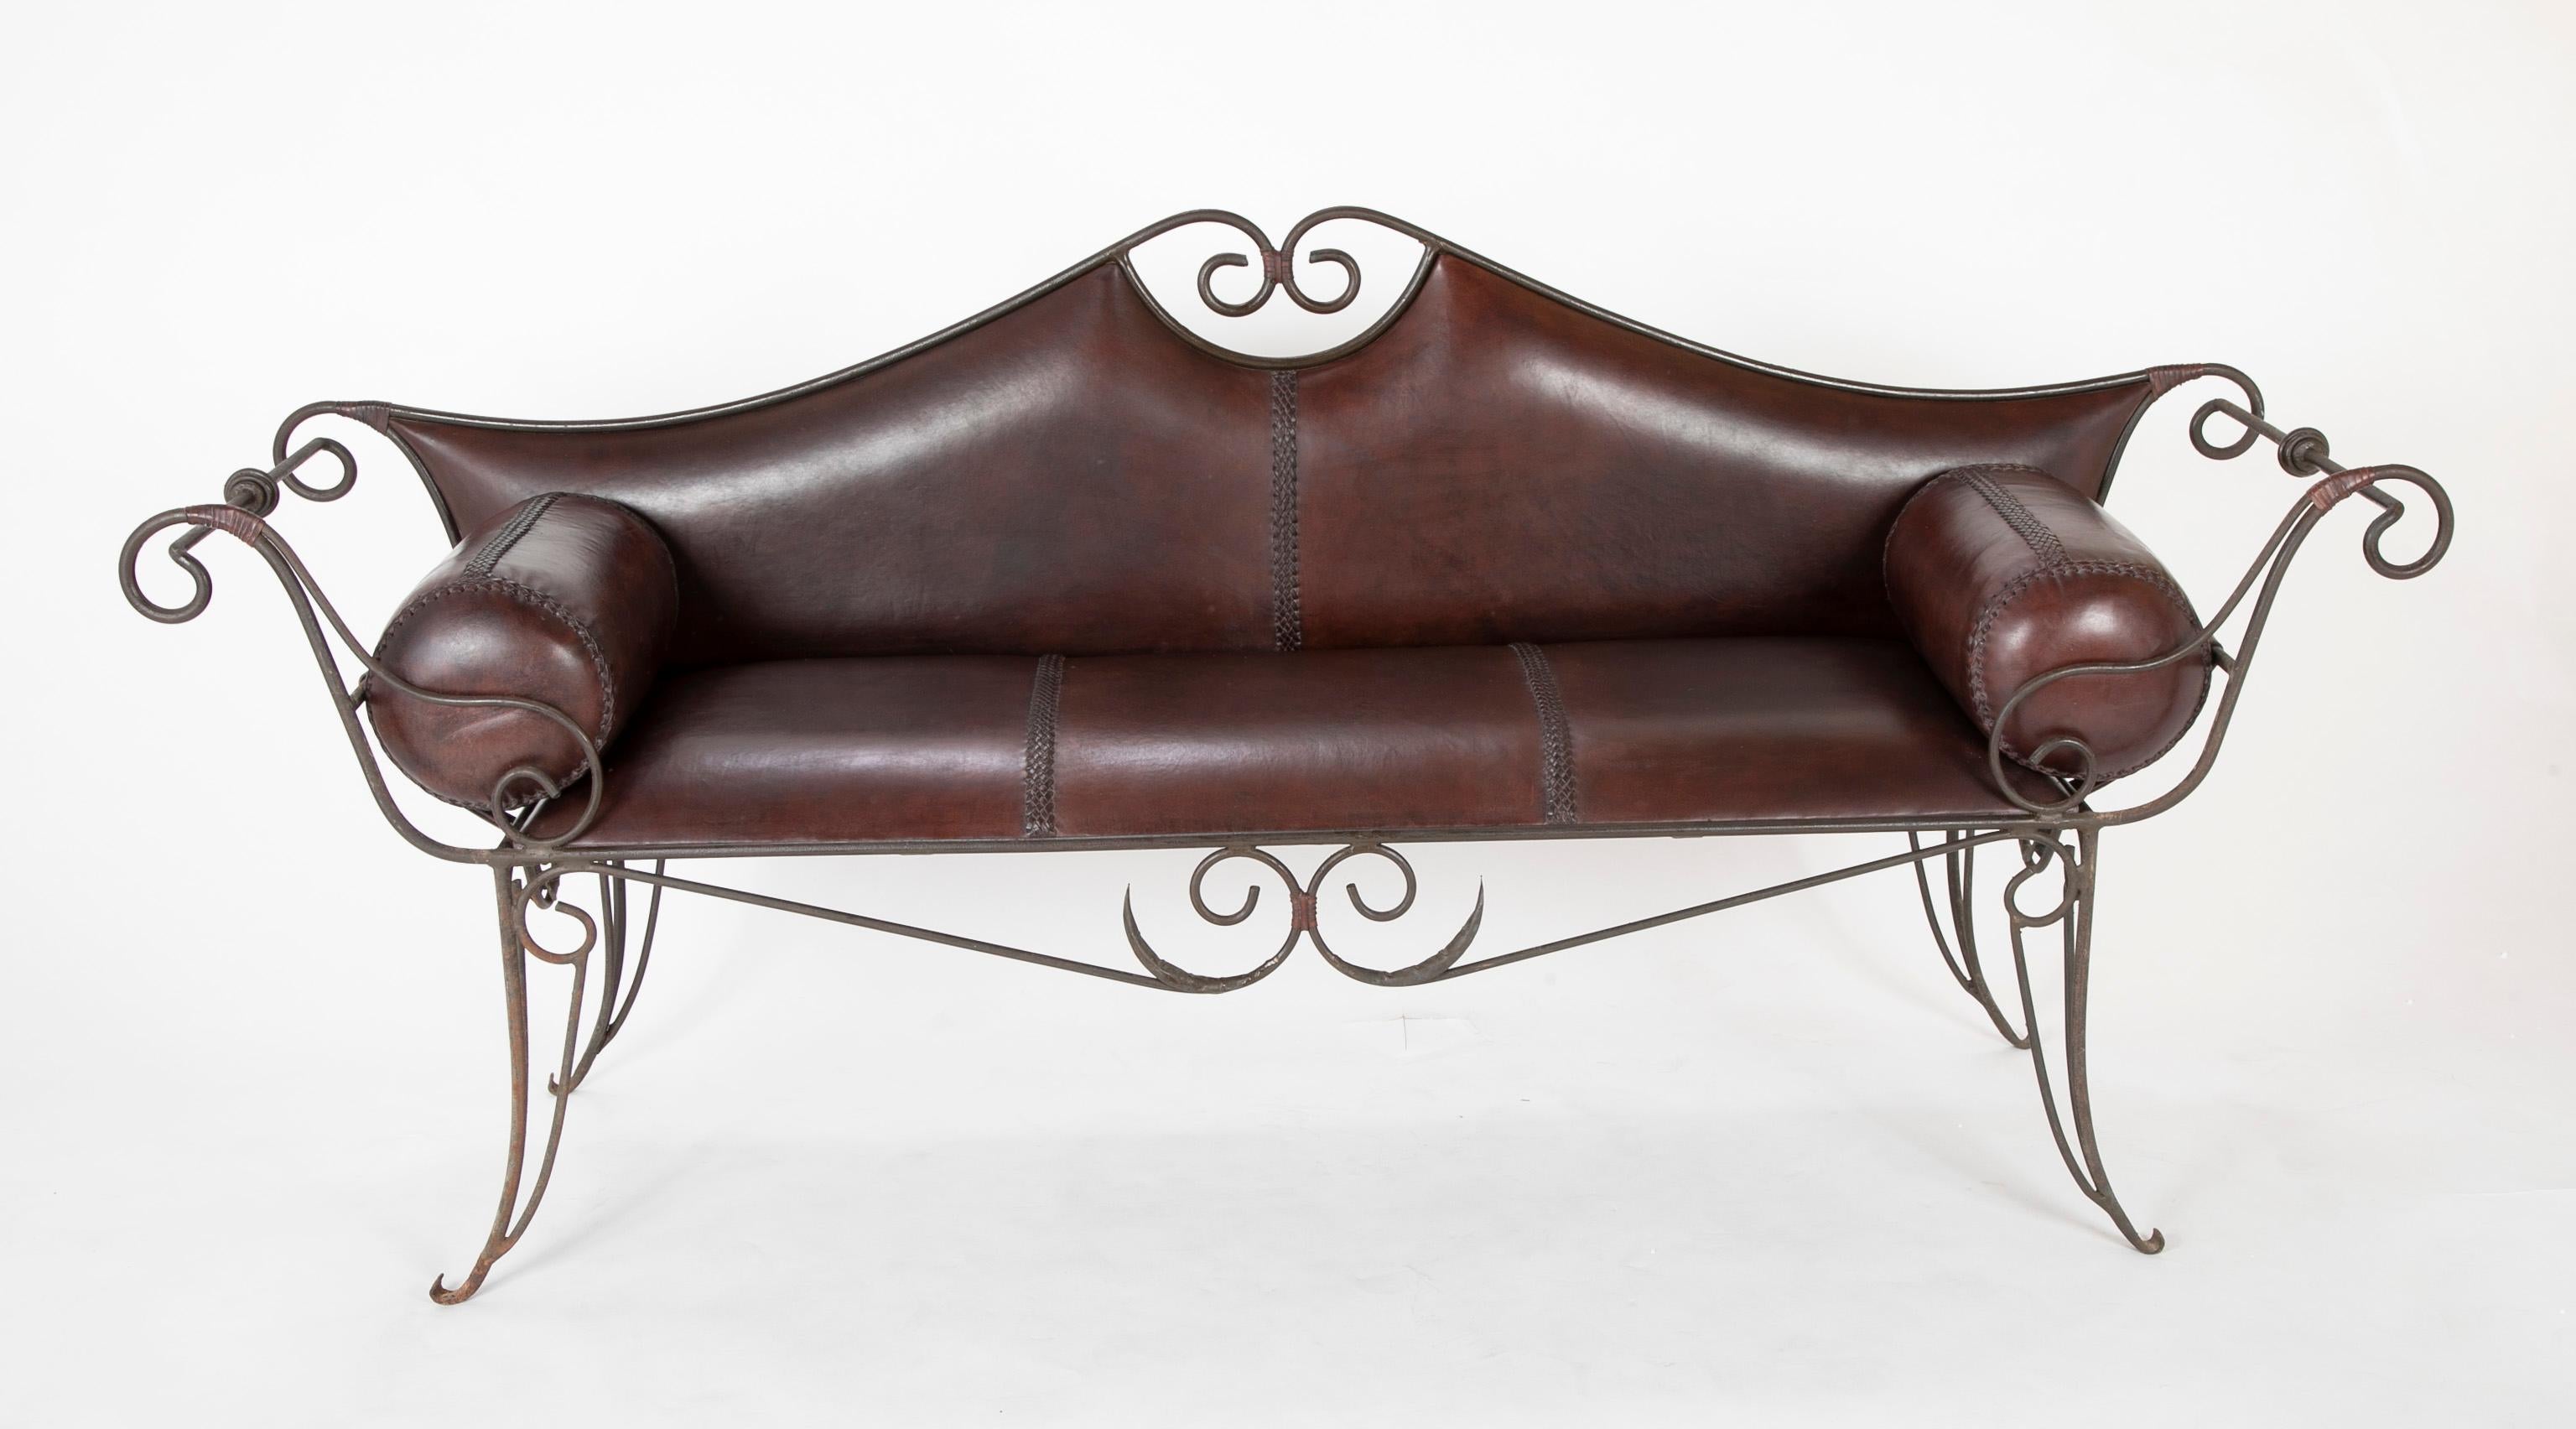 Very handsome and elegant hand crafted wrought iron and leather sofa or settee. Some pieces of furniture just make you smile, this is one. The craftsmanship of the iron work is superb, the leather is beautifully stitched.
Use as a small sofa,